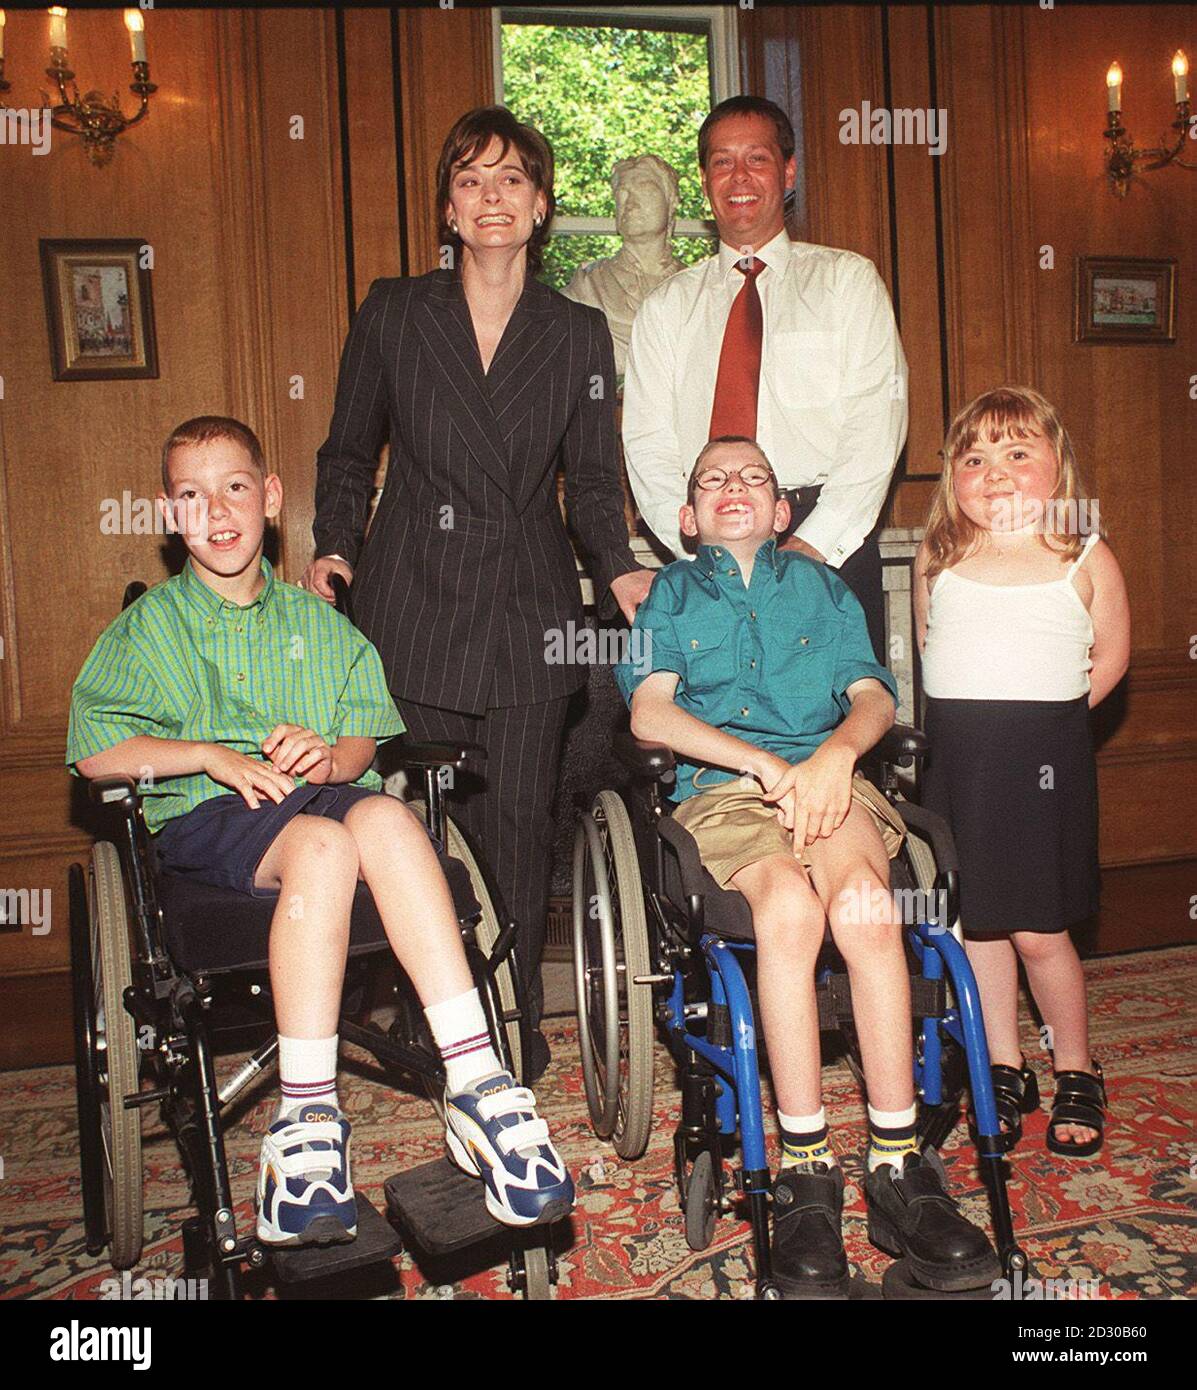 Andy Reed, MP for Loughborough, with local youngsters (l to r), Shaun Crate, Aran Frostick and Emma Tombs, at a Downing Street tea party hosted by Prime Minister's wife Cherie Booth. 09/03/03 : Andrew Reed, MP for Loughborough, at a Downing Street tea party hosted by Prime Minister's wife Cherie Booth, July 29, 1999. Reed confirmed, that he was quitting as Parliamentary Private Secretary to Environment Secretary Margaret Beckett. Although he was one of several PPSs identified as objecting to British troops taking part in military action against Iraq in the absence of a second UN resolution, Stock Photo